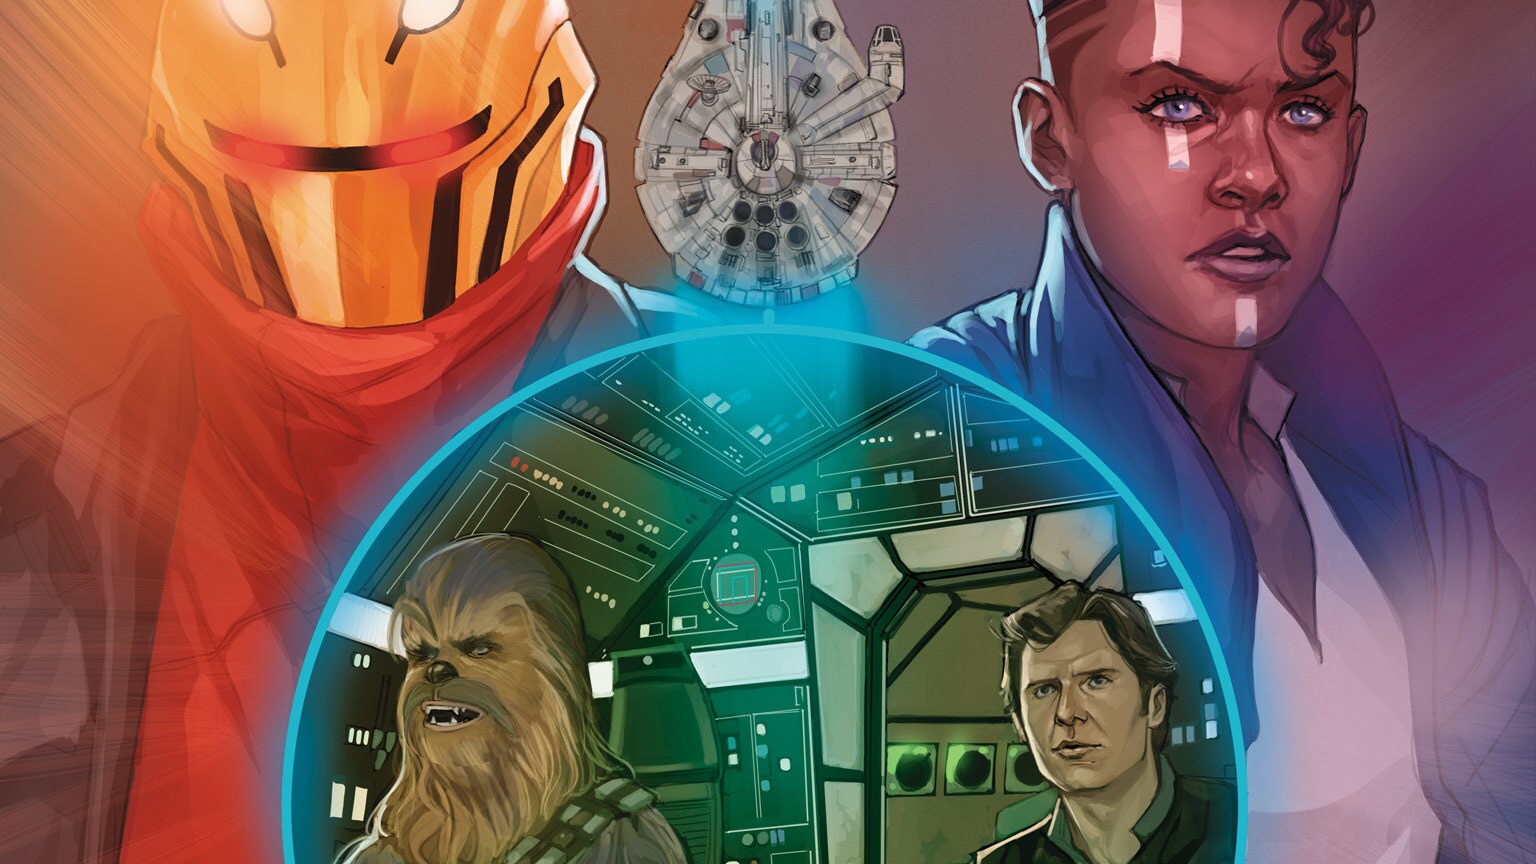 Everyone’s Punching Han in Marvel’s Star Wars: Han Solo & Chewbacca #5 - Exclusive Preview